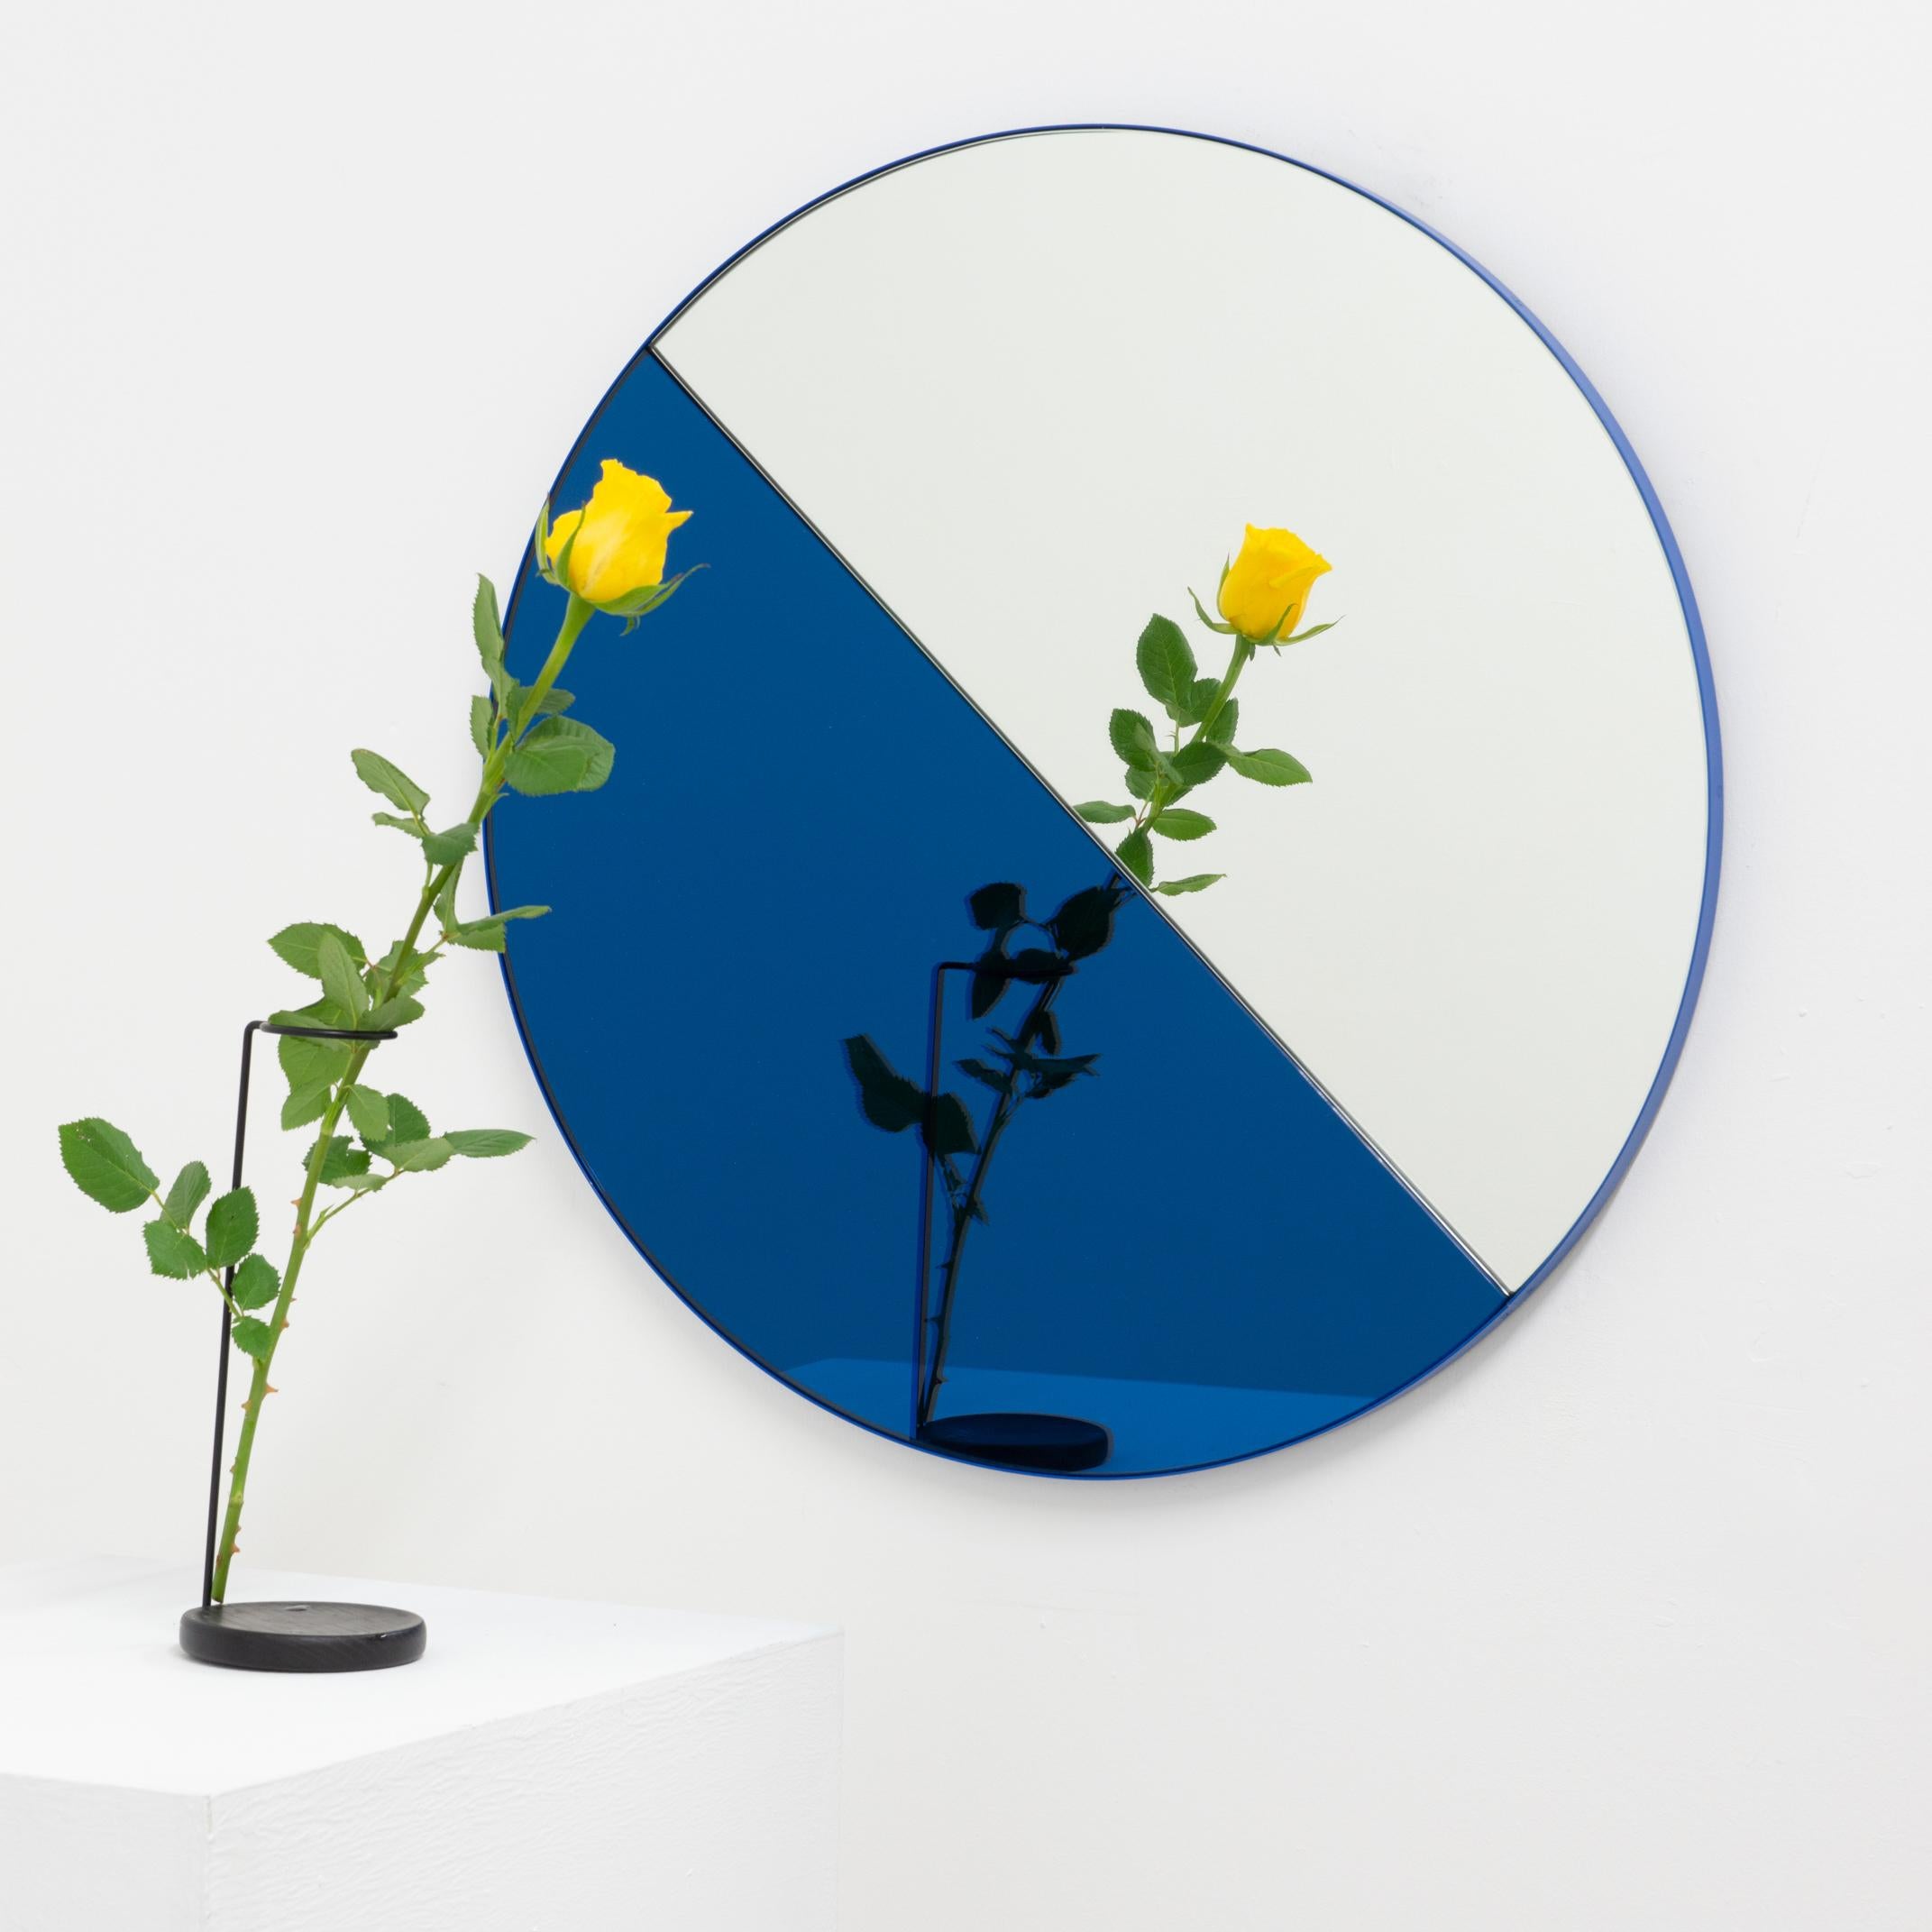 Contemporary mixed blue and silver mirror tints Dualis Orbis with a blue frame. Designed and handcrafted in London, UK.

All mirrors are fitted with an ingenious French cleat (split batten) system so they may hang flush with the wall in four